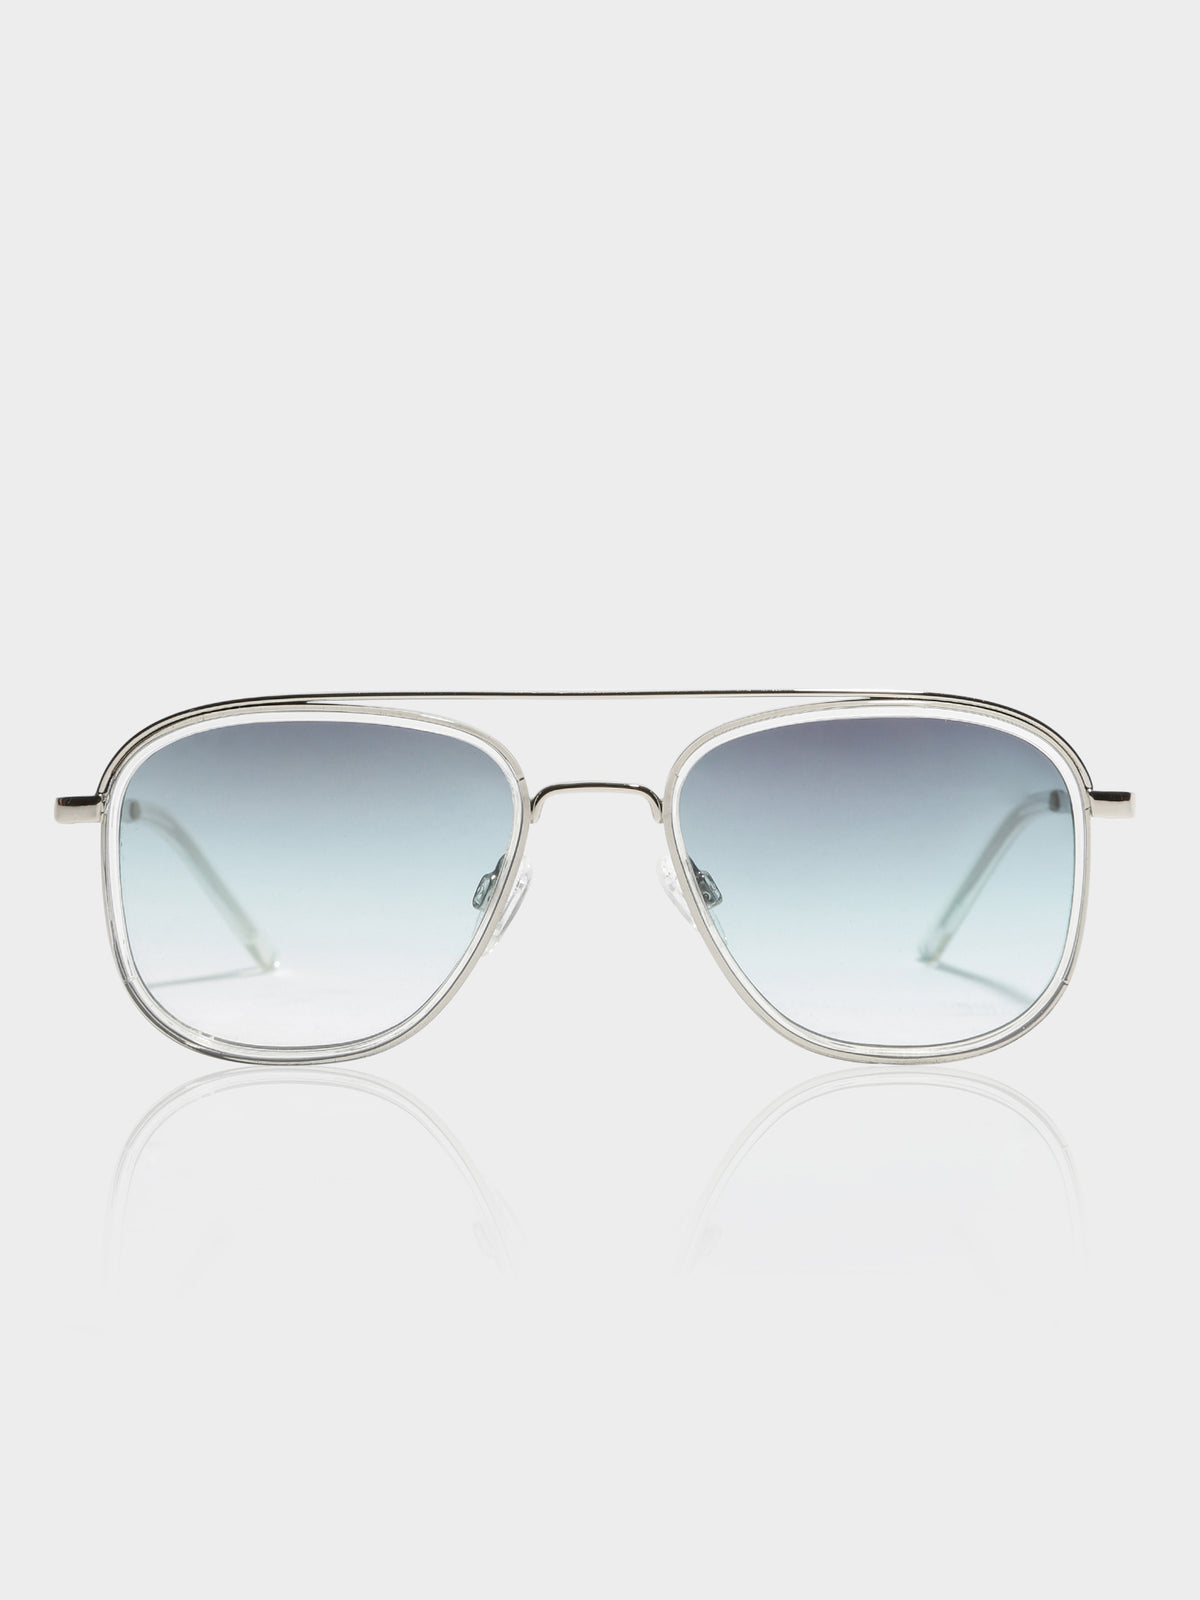 Clive Sunglasses in Gradient Turqoise and Silver